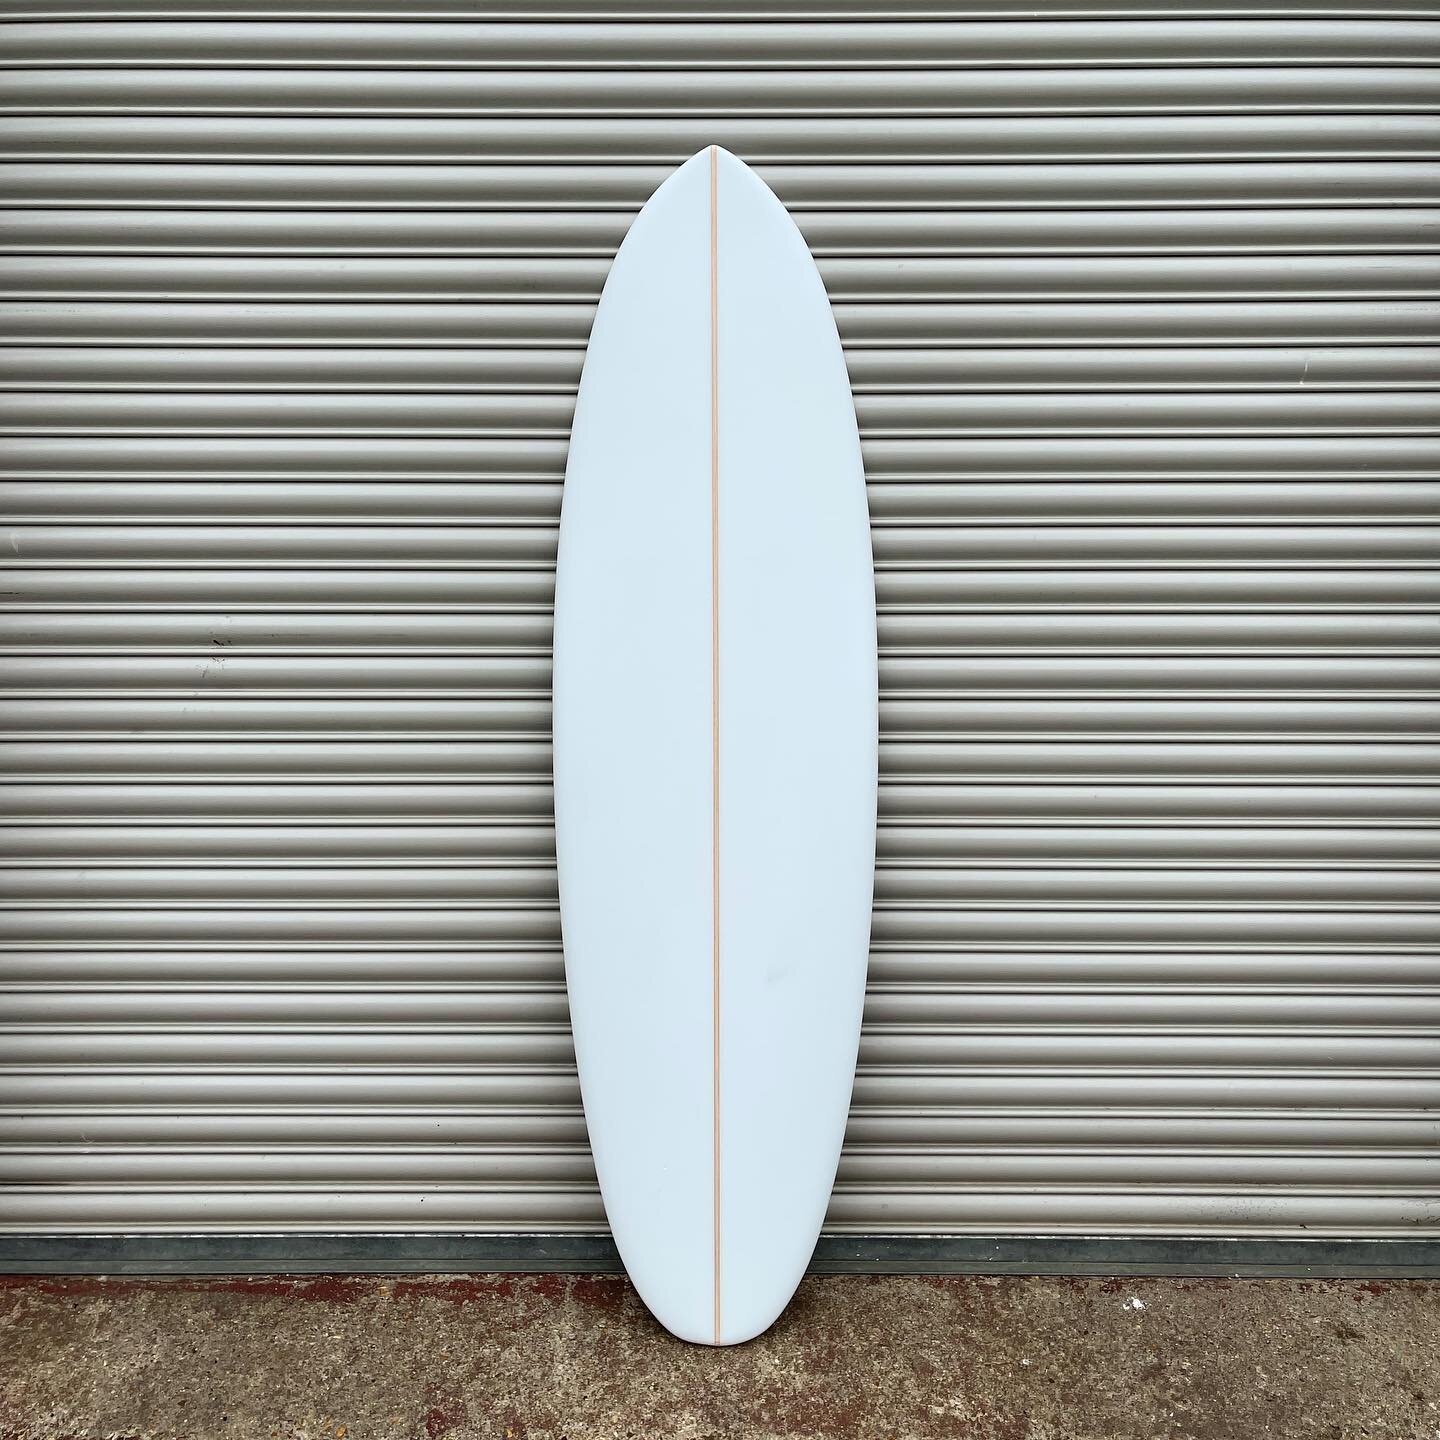 Available: 6&rsquo;6 x 22 x 2 3/4 .. a version of the &lsquo;money maker&rsquo; without the vintage beak nose 🏴&zwj;☠️ 

#ahoysurfcraft